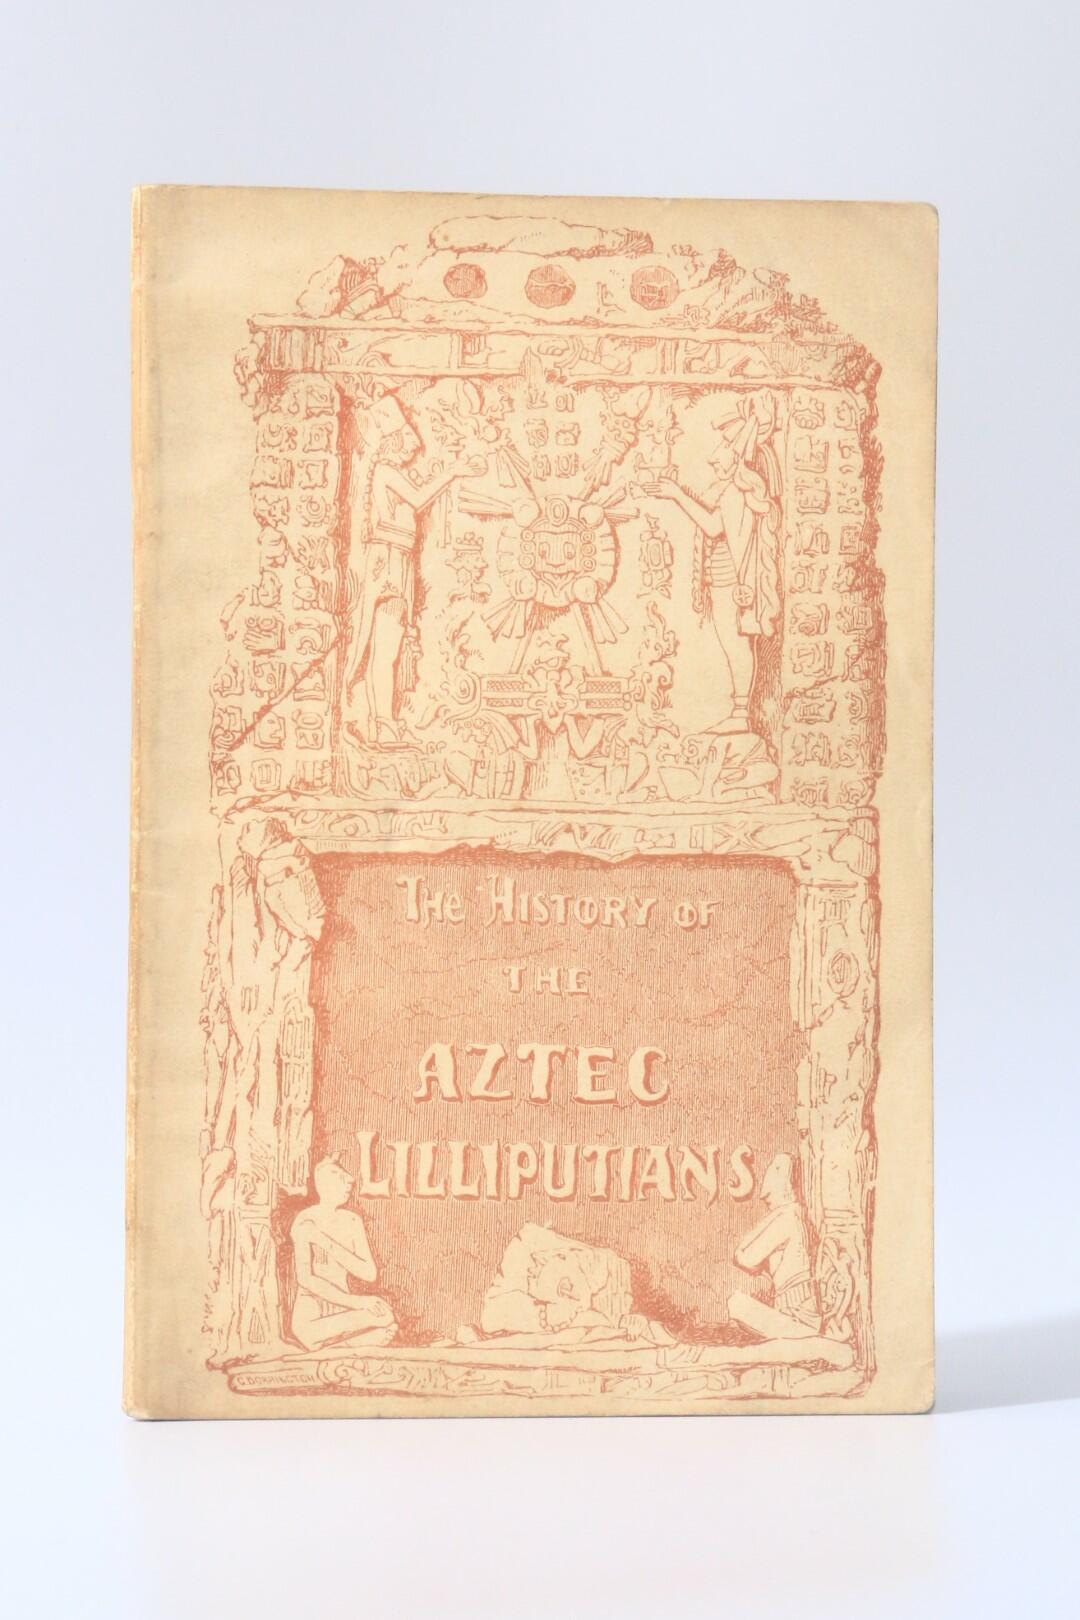 John L. Stephens & Pedro Velazquez - The History of the Aztec Lilliputians: Illustrated Memoir of an Eventful Expedition into Central America; Resulting in the Discovery of the Idolatrous City of Iximaya, in an Unexplored Region; and the Possession of Two Remarkable Aztec Children, Maximo (The Man) and Bartola (The Girl) Descendants and Specimens of the Sacerdotal Cast (Now Nearly Extinct), of the Ancient Aztec Founders of the Ruined Temples of that Country, Described by John L. Stephens, Esq., and Other Travellers. - No Publisher, nd [1850s], First Edition.